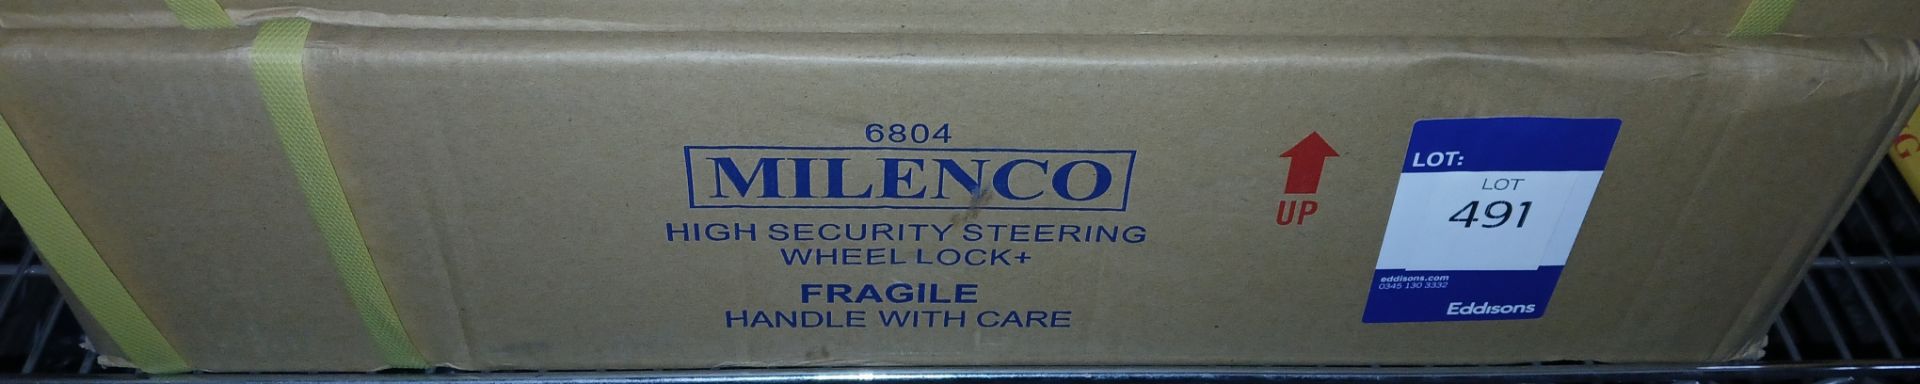 Milenco High Security Sterring Wheel Lock + (Please note, Viewing Strongly Recommended - Eddisons